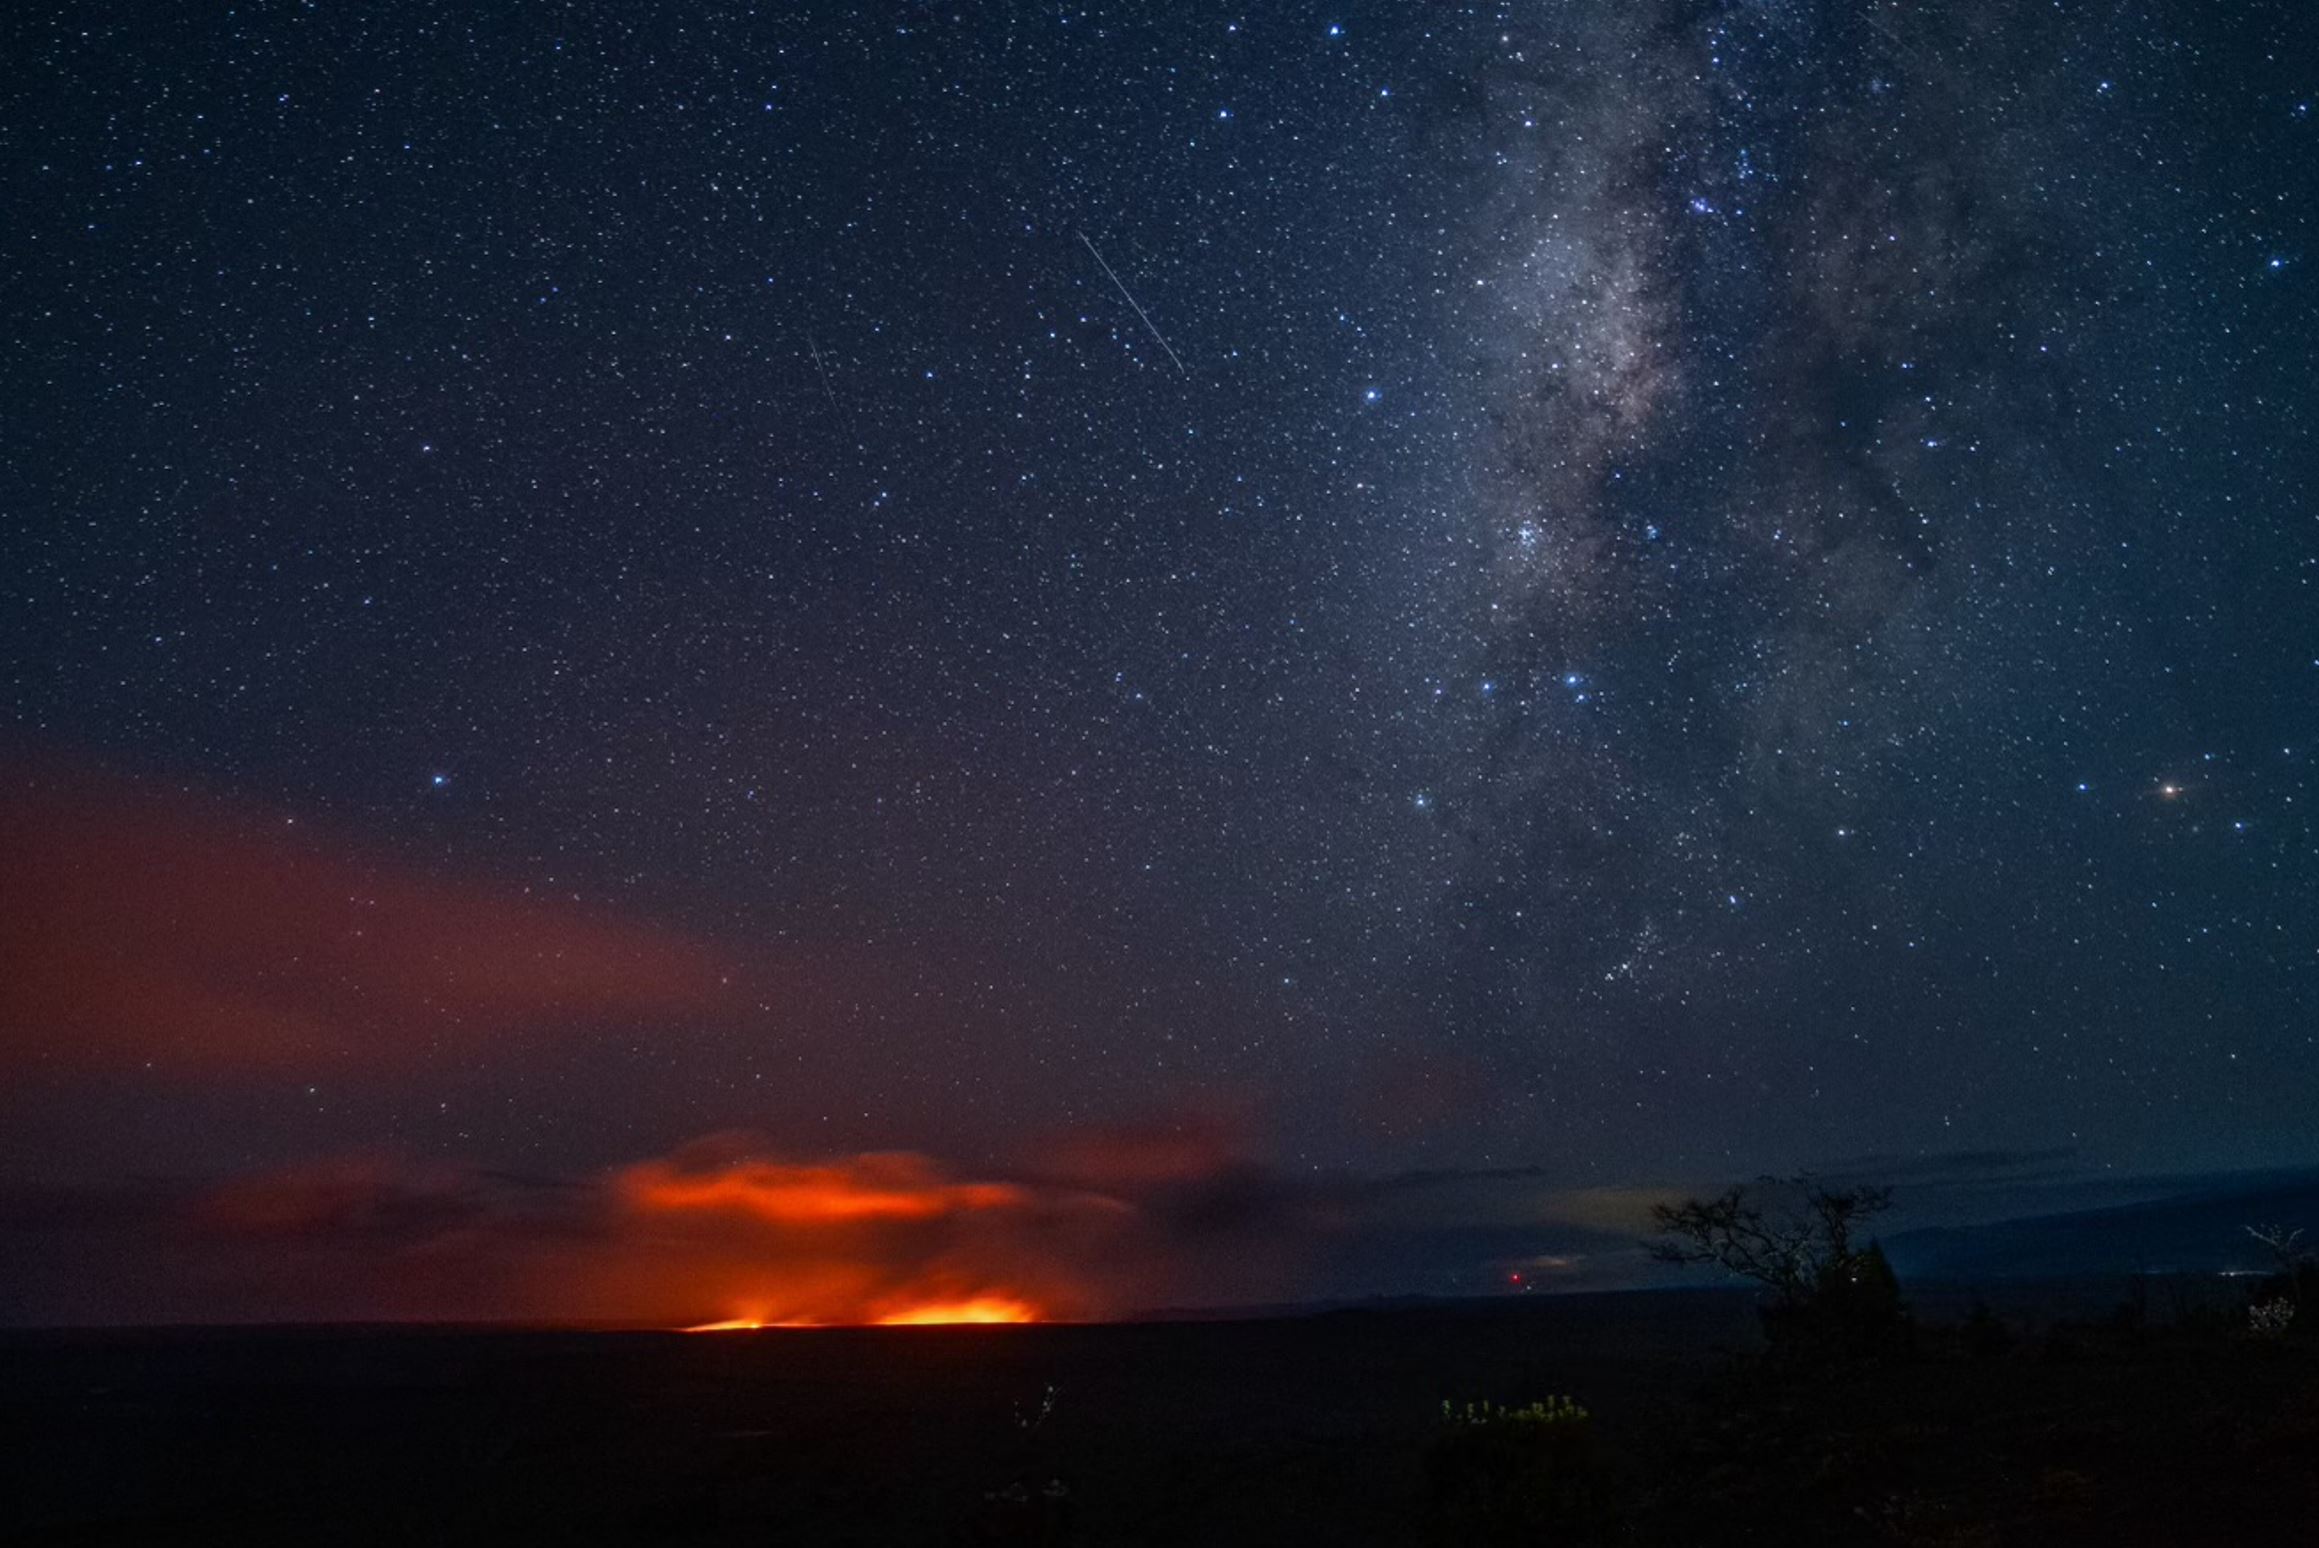 Milky Way and glow from an eruption seen from a distance at night.